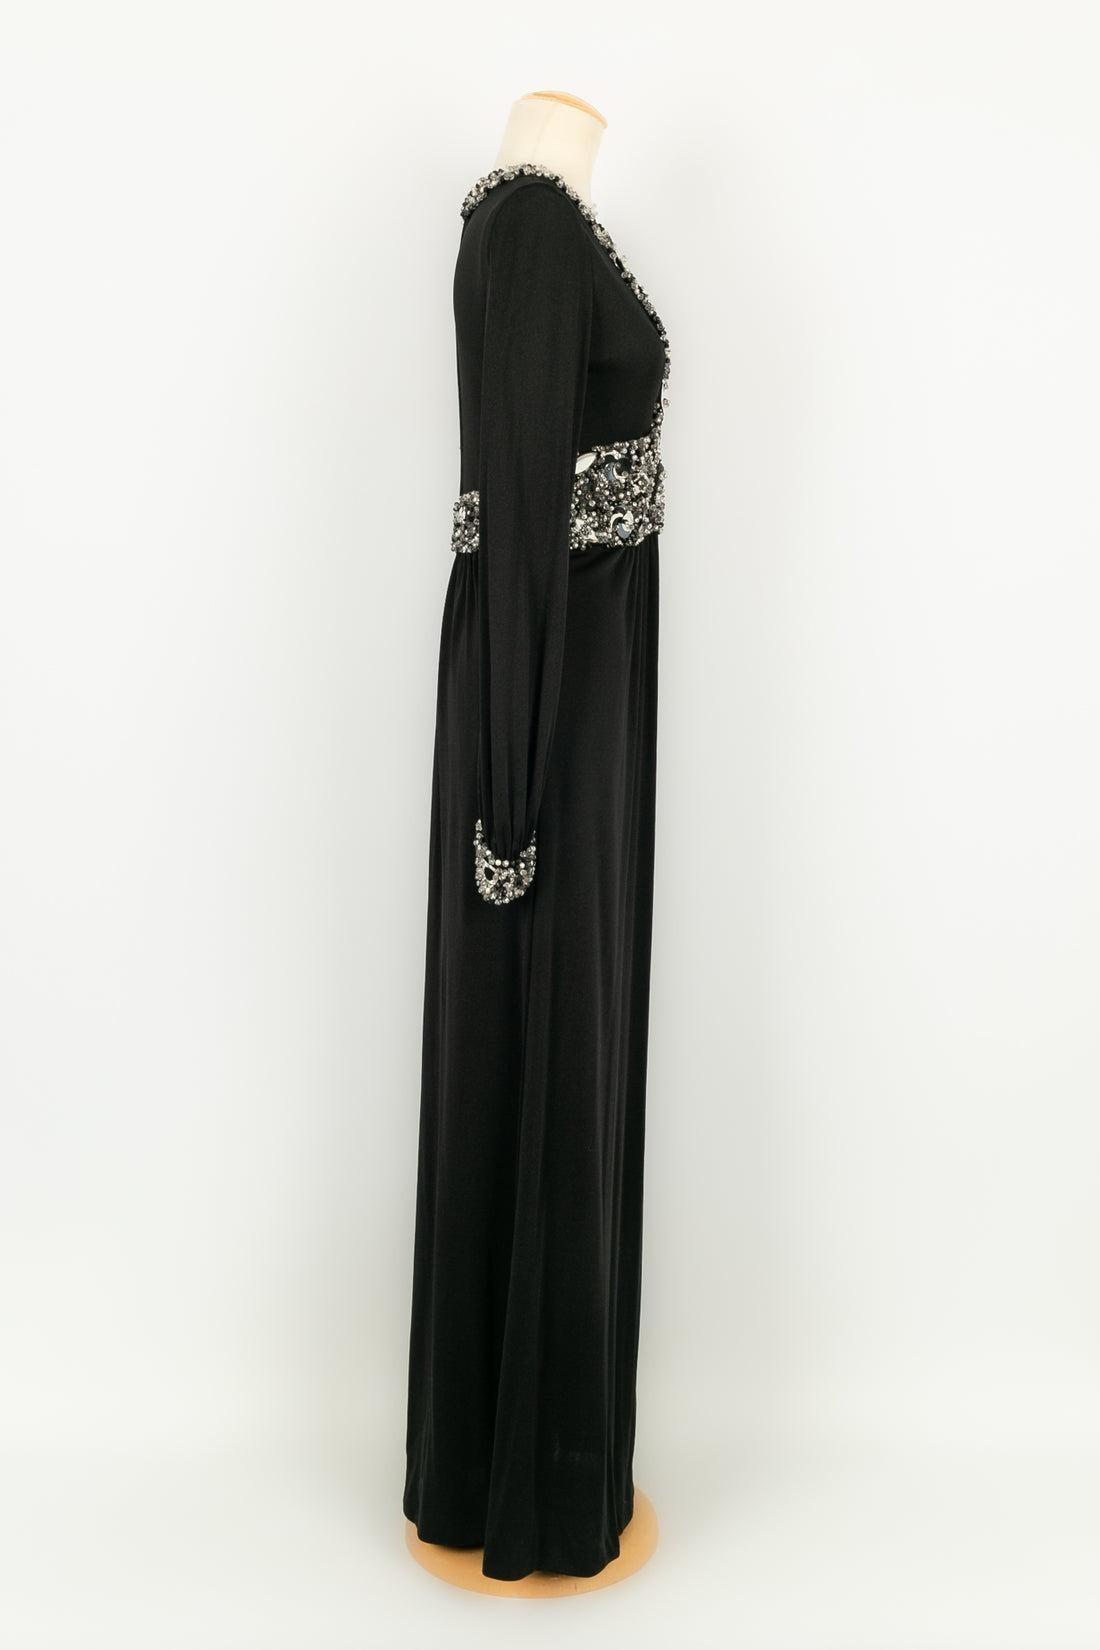 Azzaro - (Made in France) Long-sleeved dress in black jersey sewn with pearls and celluloid elements. No size nor composition label, it fits a 38FR.

Additional information:
Condition: Very good condition
Dimensions: Shoulder width: 38 cm - Chest: